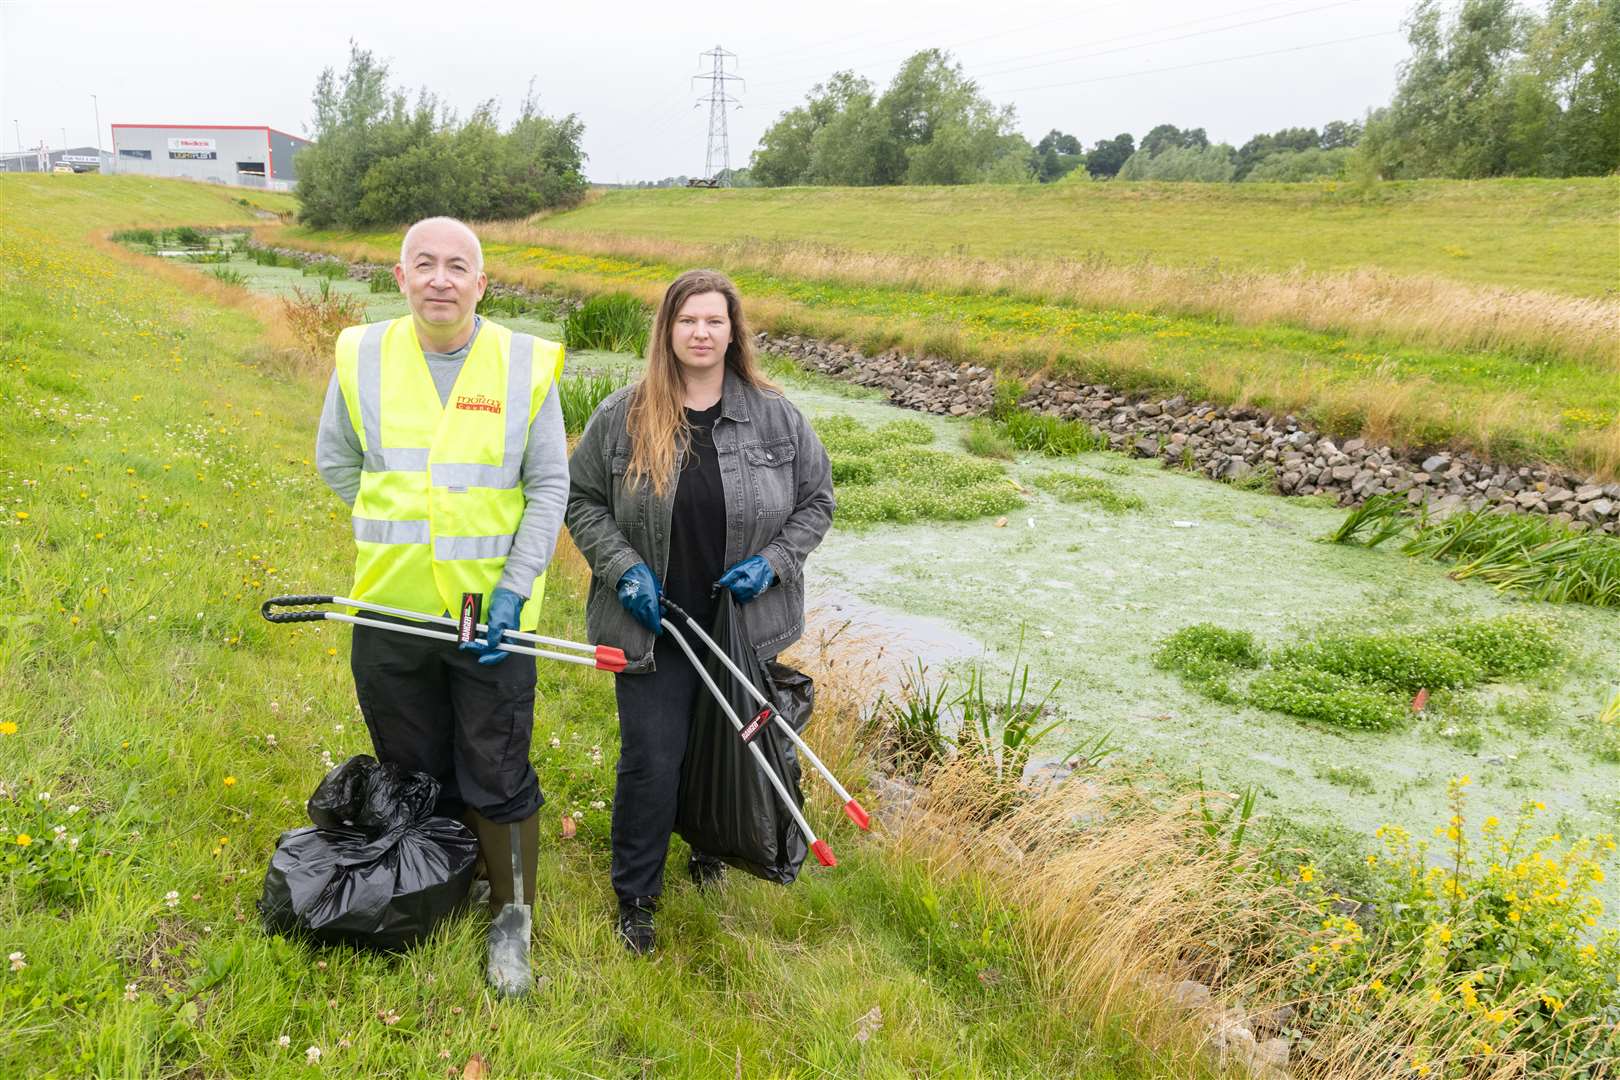 Councillors Marc Macrae (Fochabers/Lhanbryde, Conservative) and Amber Dunbar (Elgin North, Conservative) litter picking along the flood alleviation beside Grampian Furnishers in Elgin...Picture: Beth Taylor.